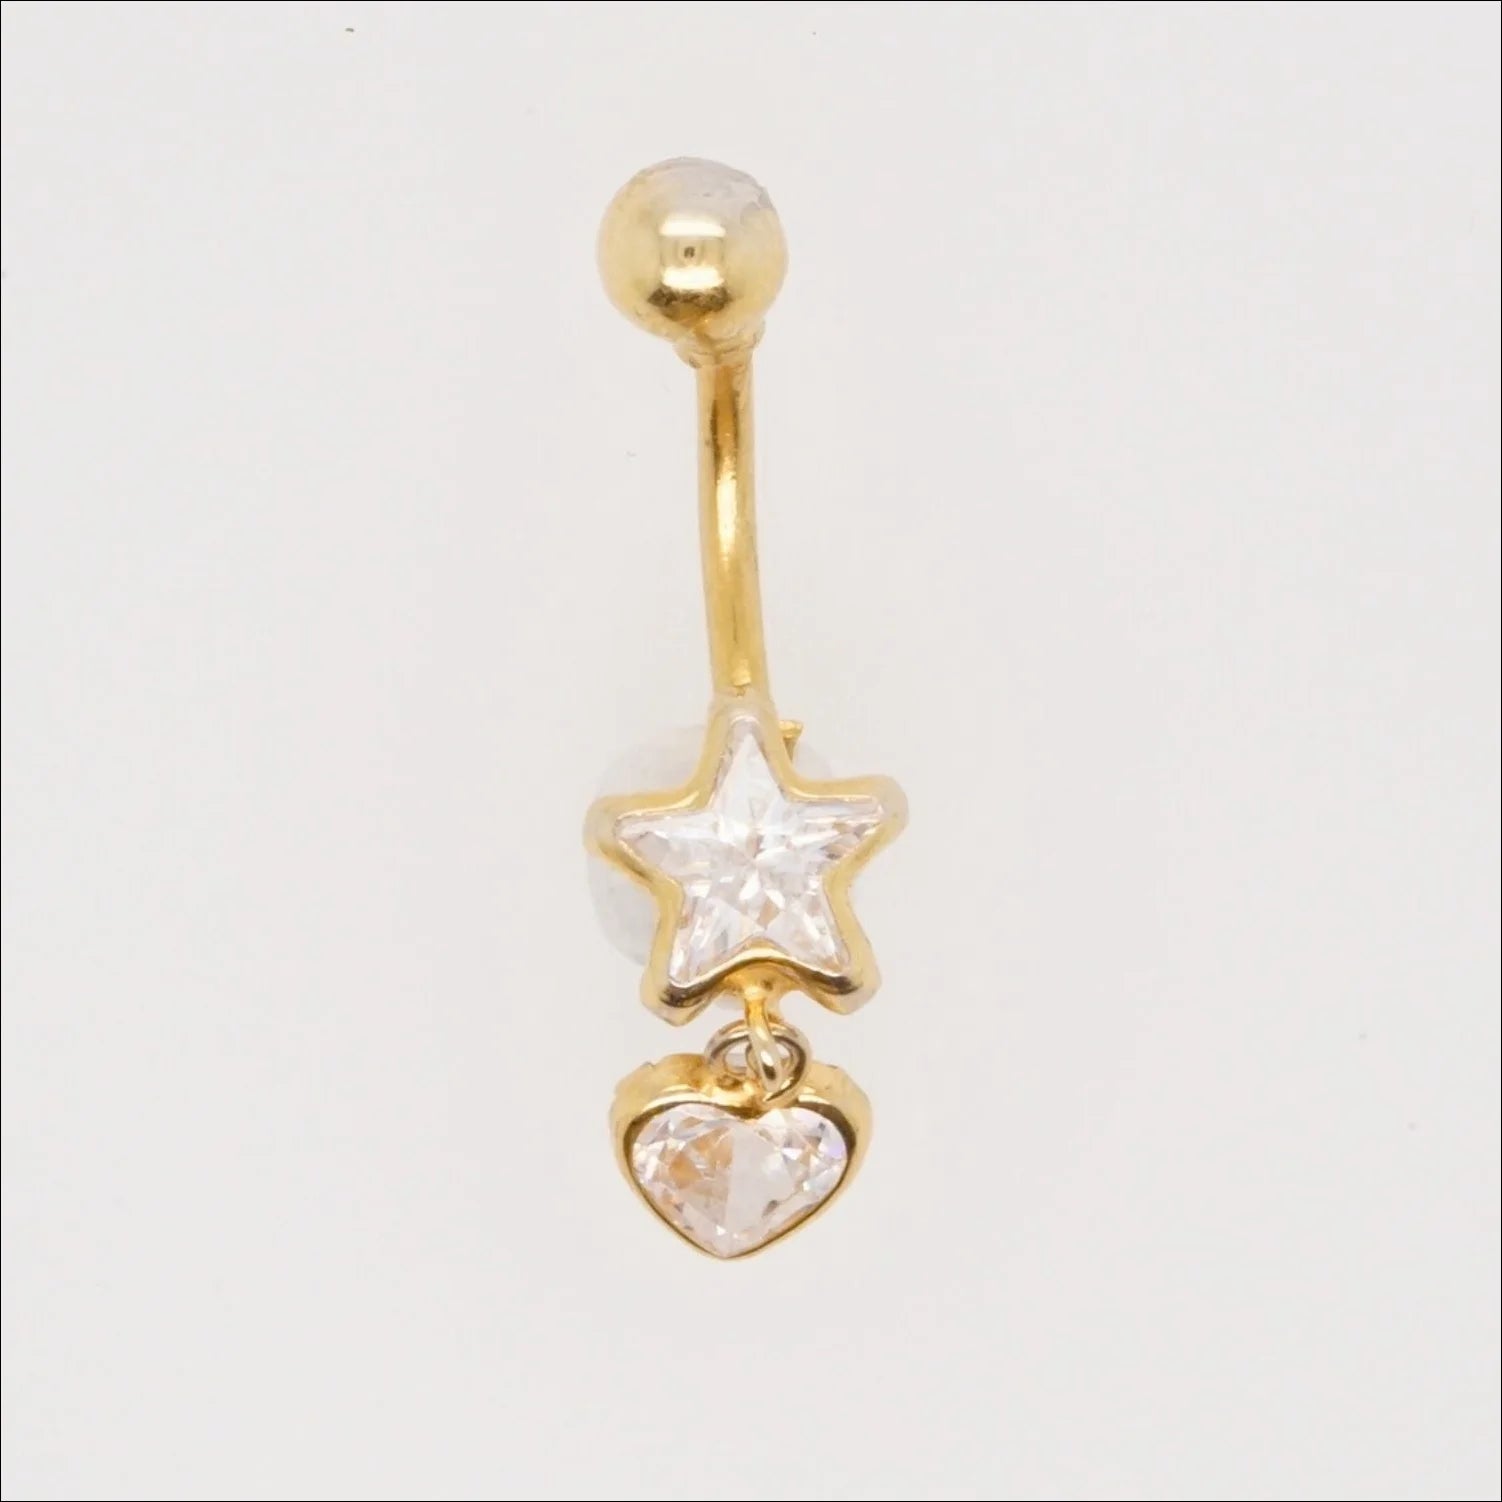 18k Gold Star and Heart Bellybutton Piercing | Home page